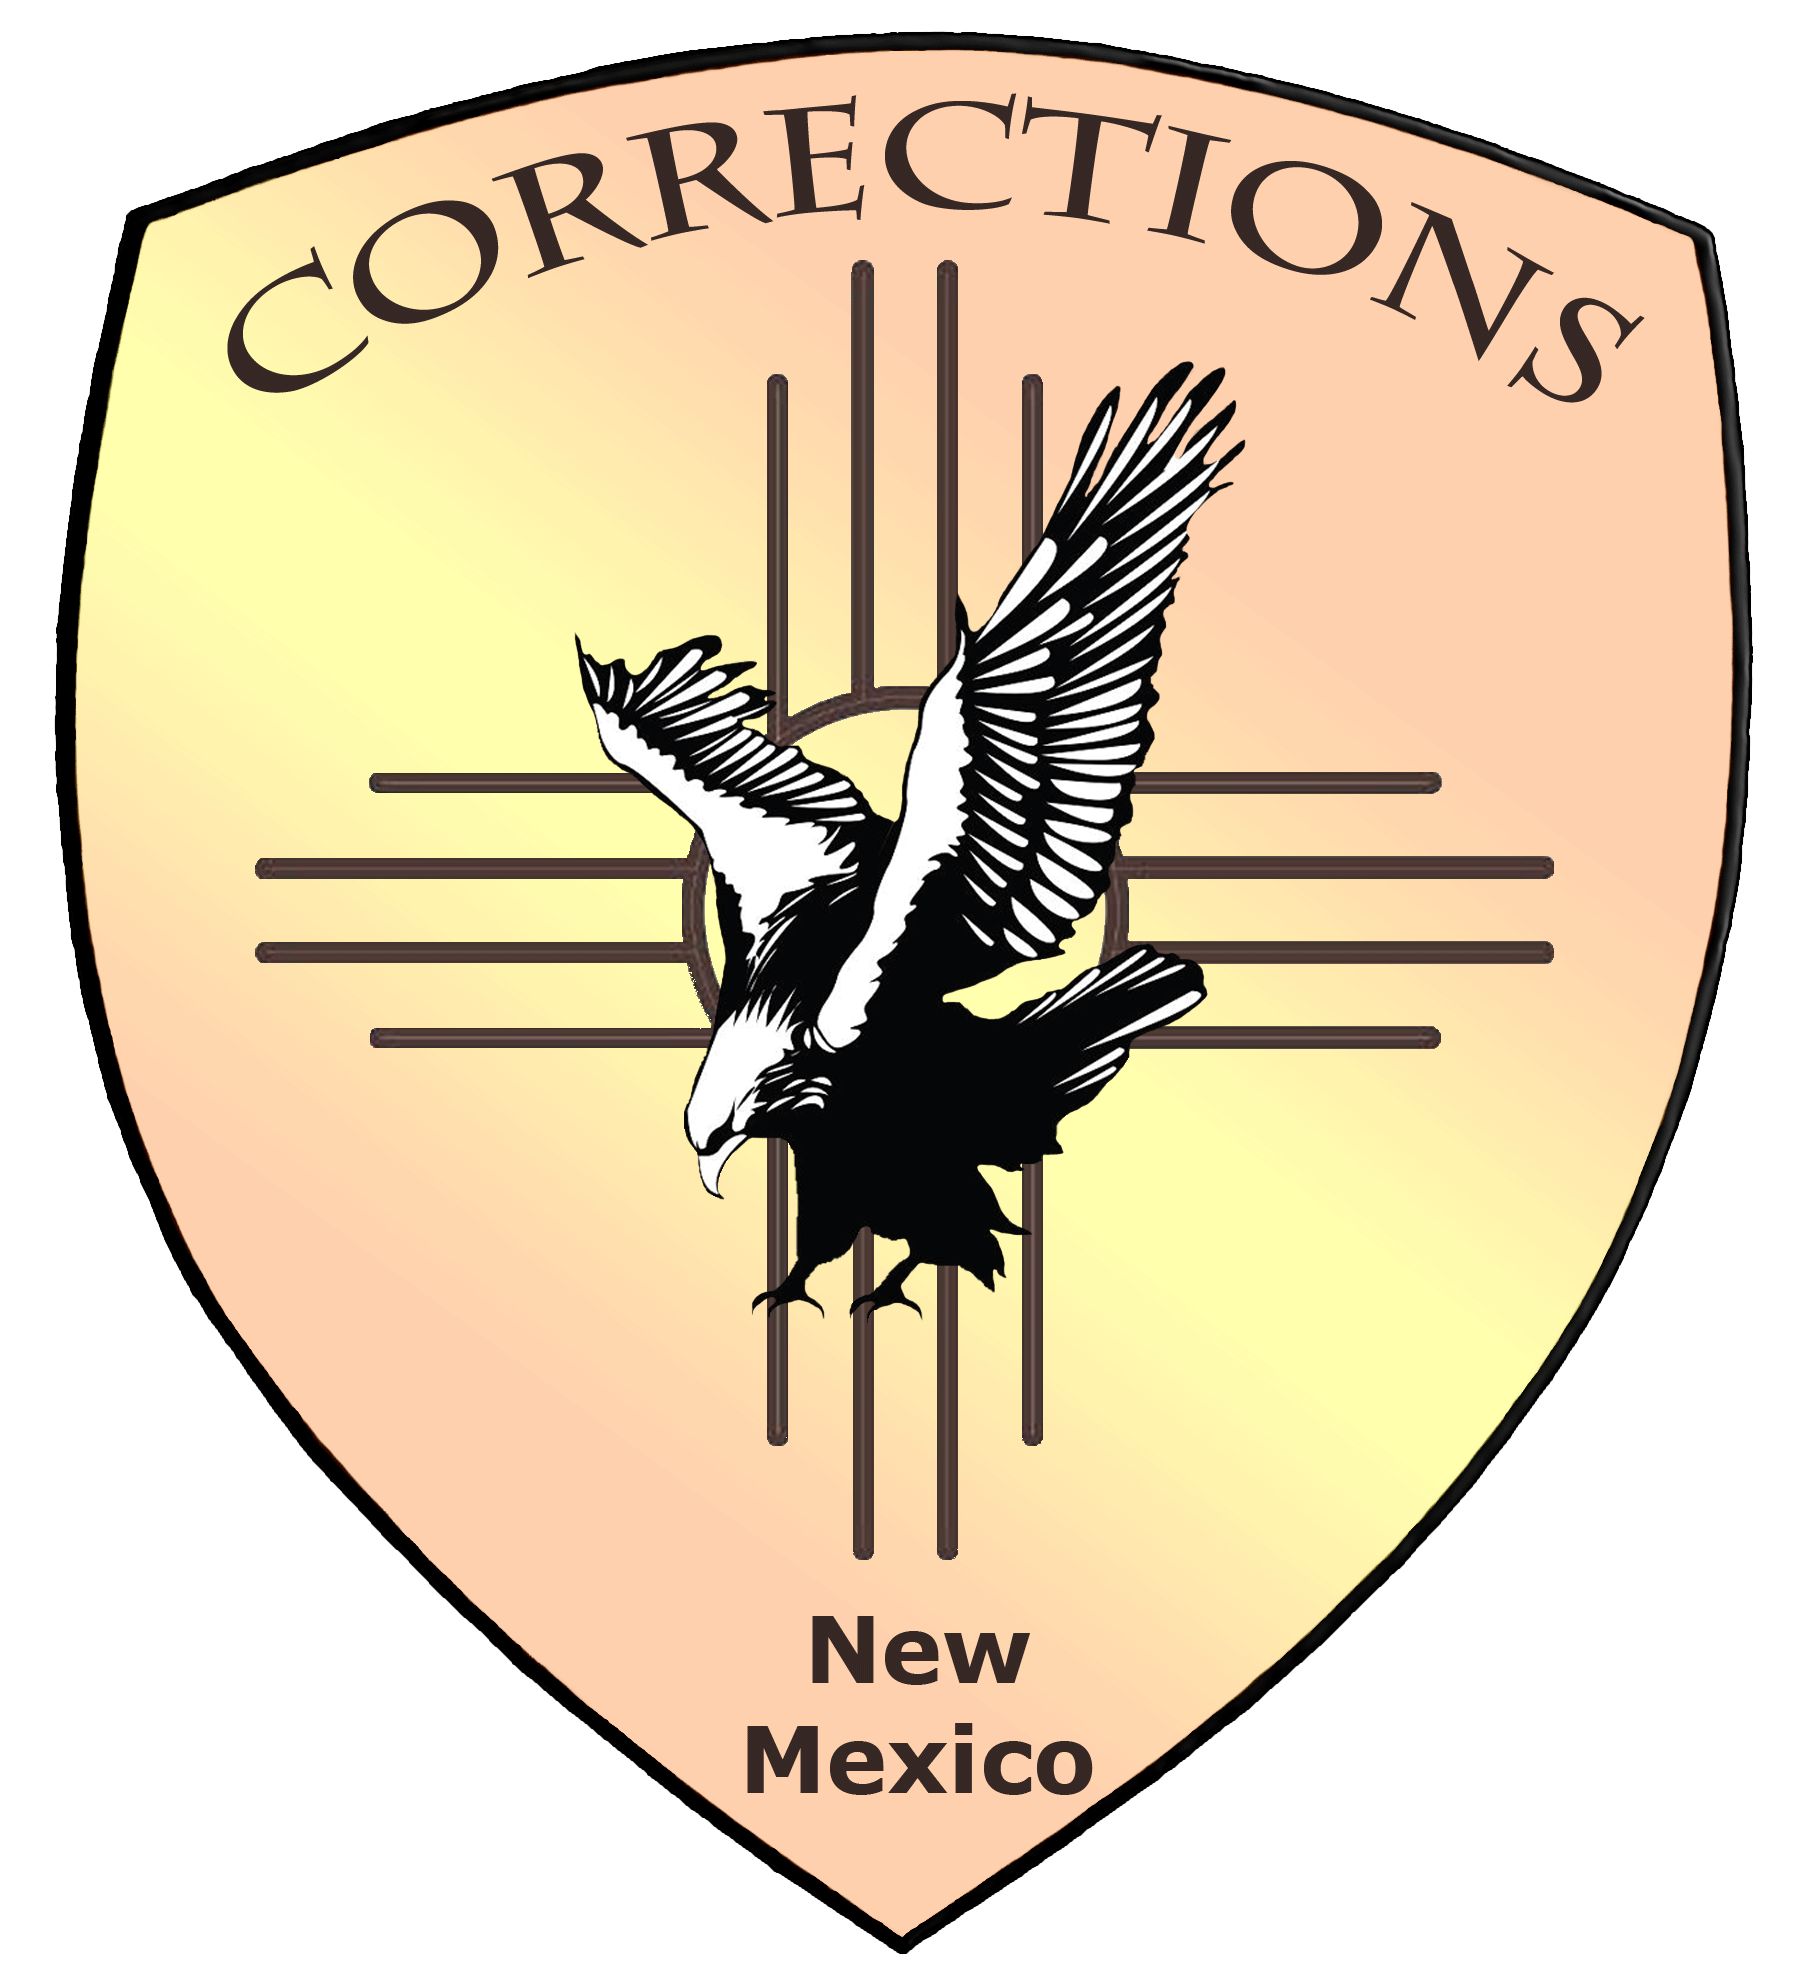 Nmcd new mexico corrections. Handcuffs clipart probation